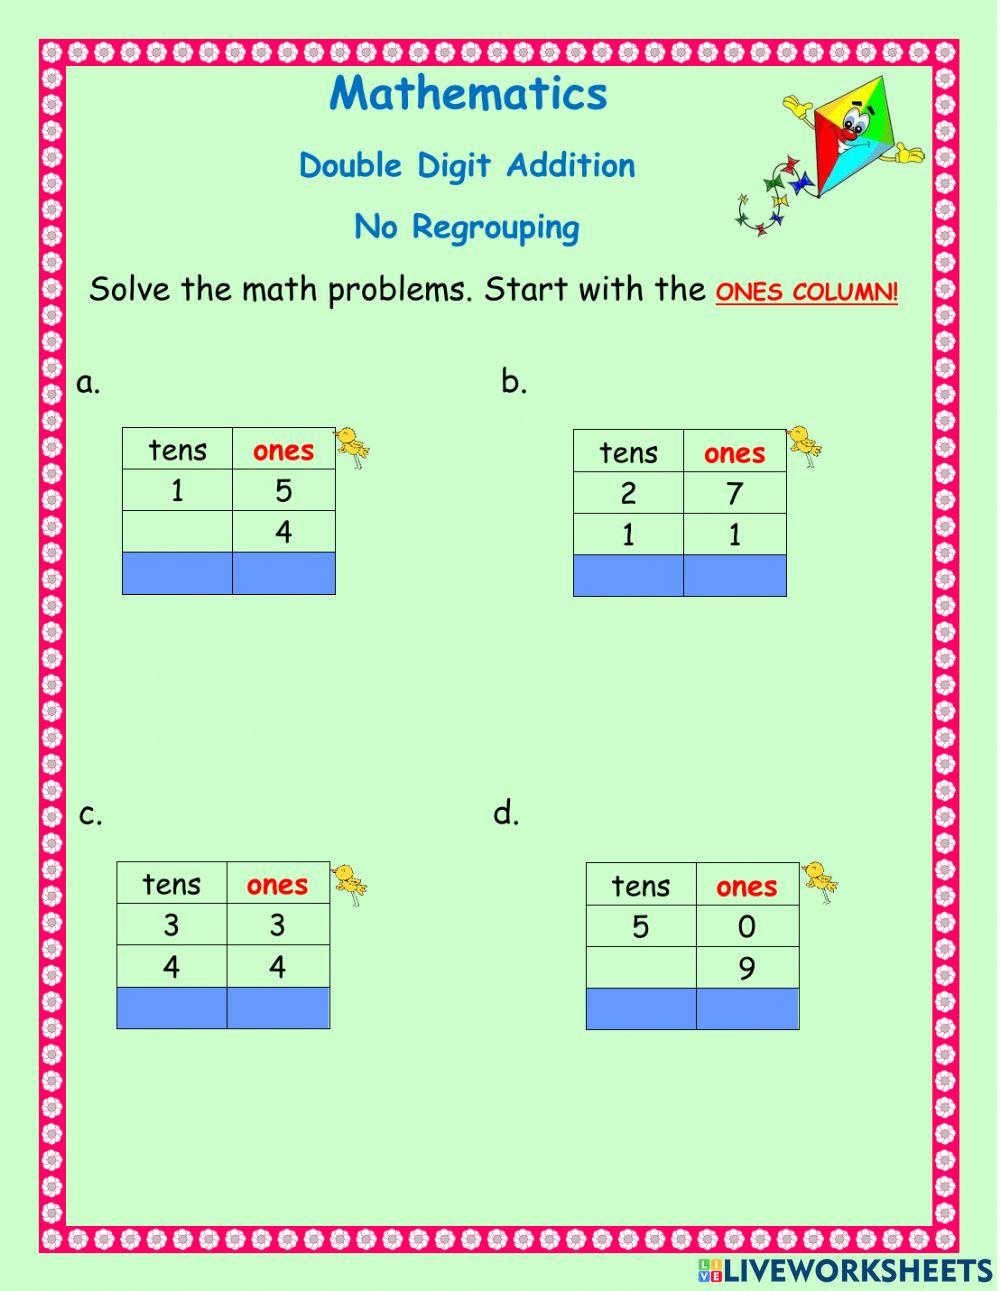 Double digit addition -4